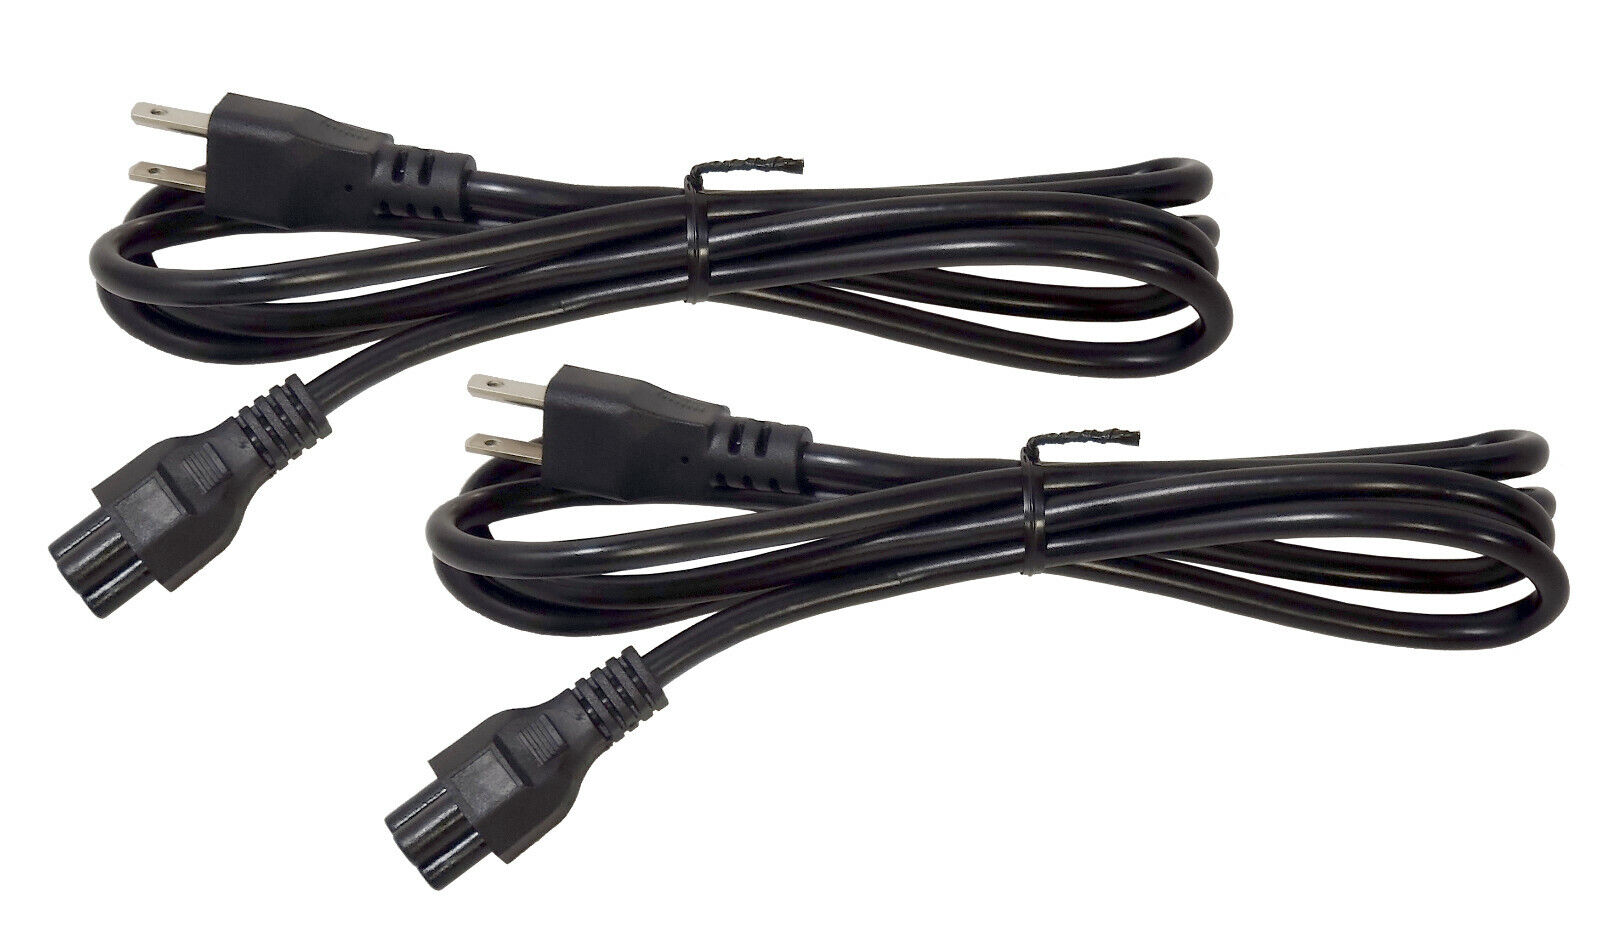 NEW 2-PACK 3 Prong 6-foot AC Mickey Power Cord NEMA 5-15P to C5 Cable 2.5A 250V